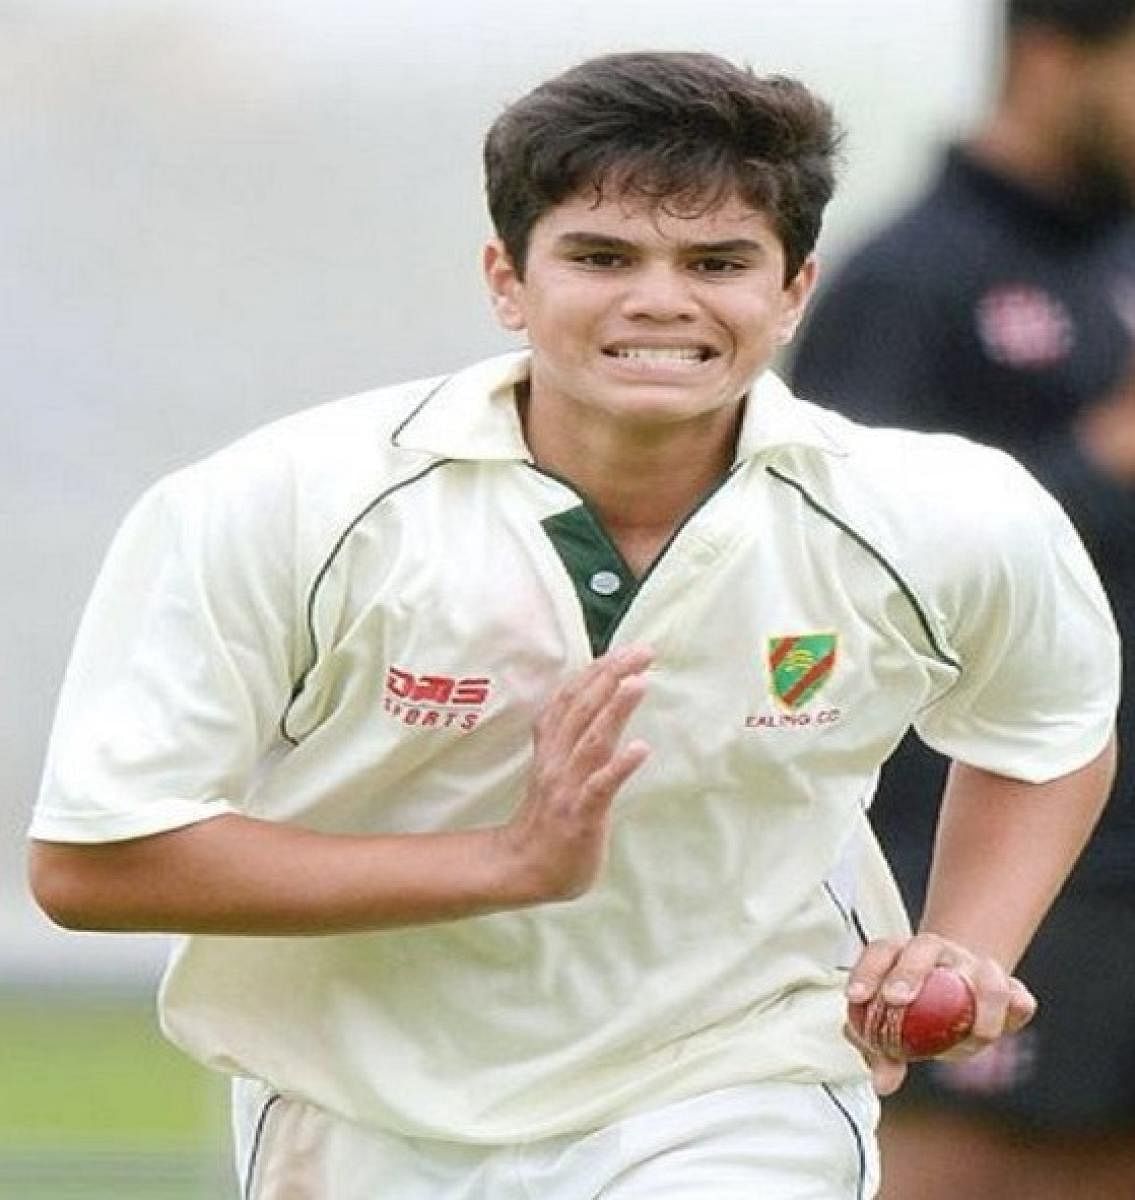 Standing at 6ft 1inch, the 18-year-old Arjun is a left-arm fast bowler and a handy lower middle order batsman.